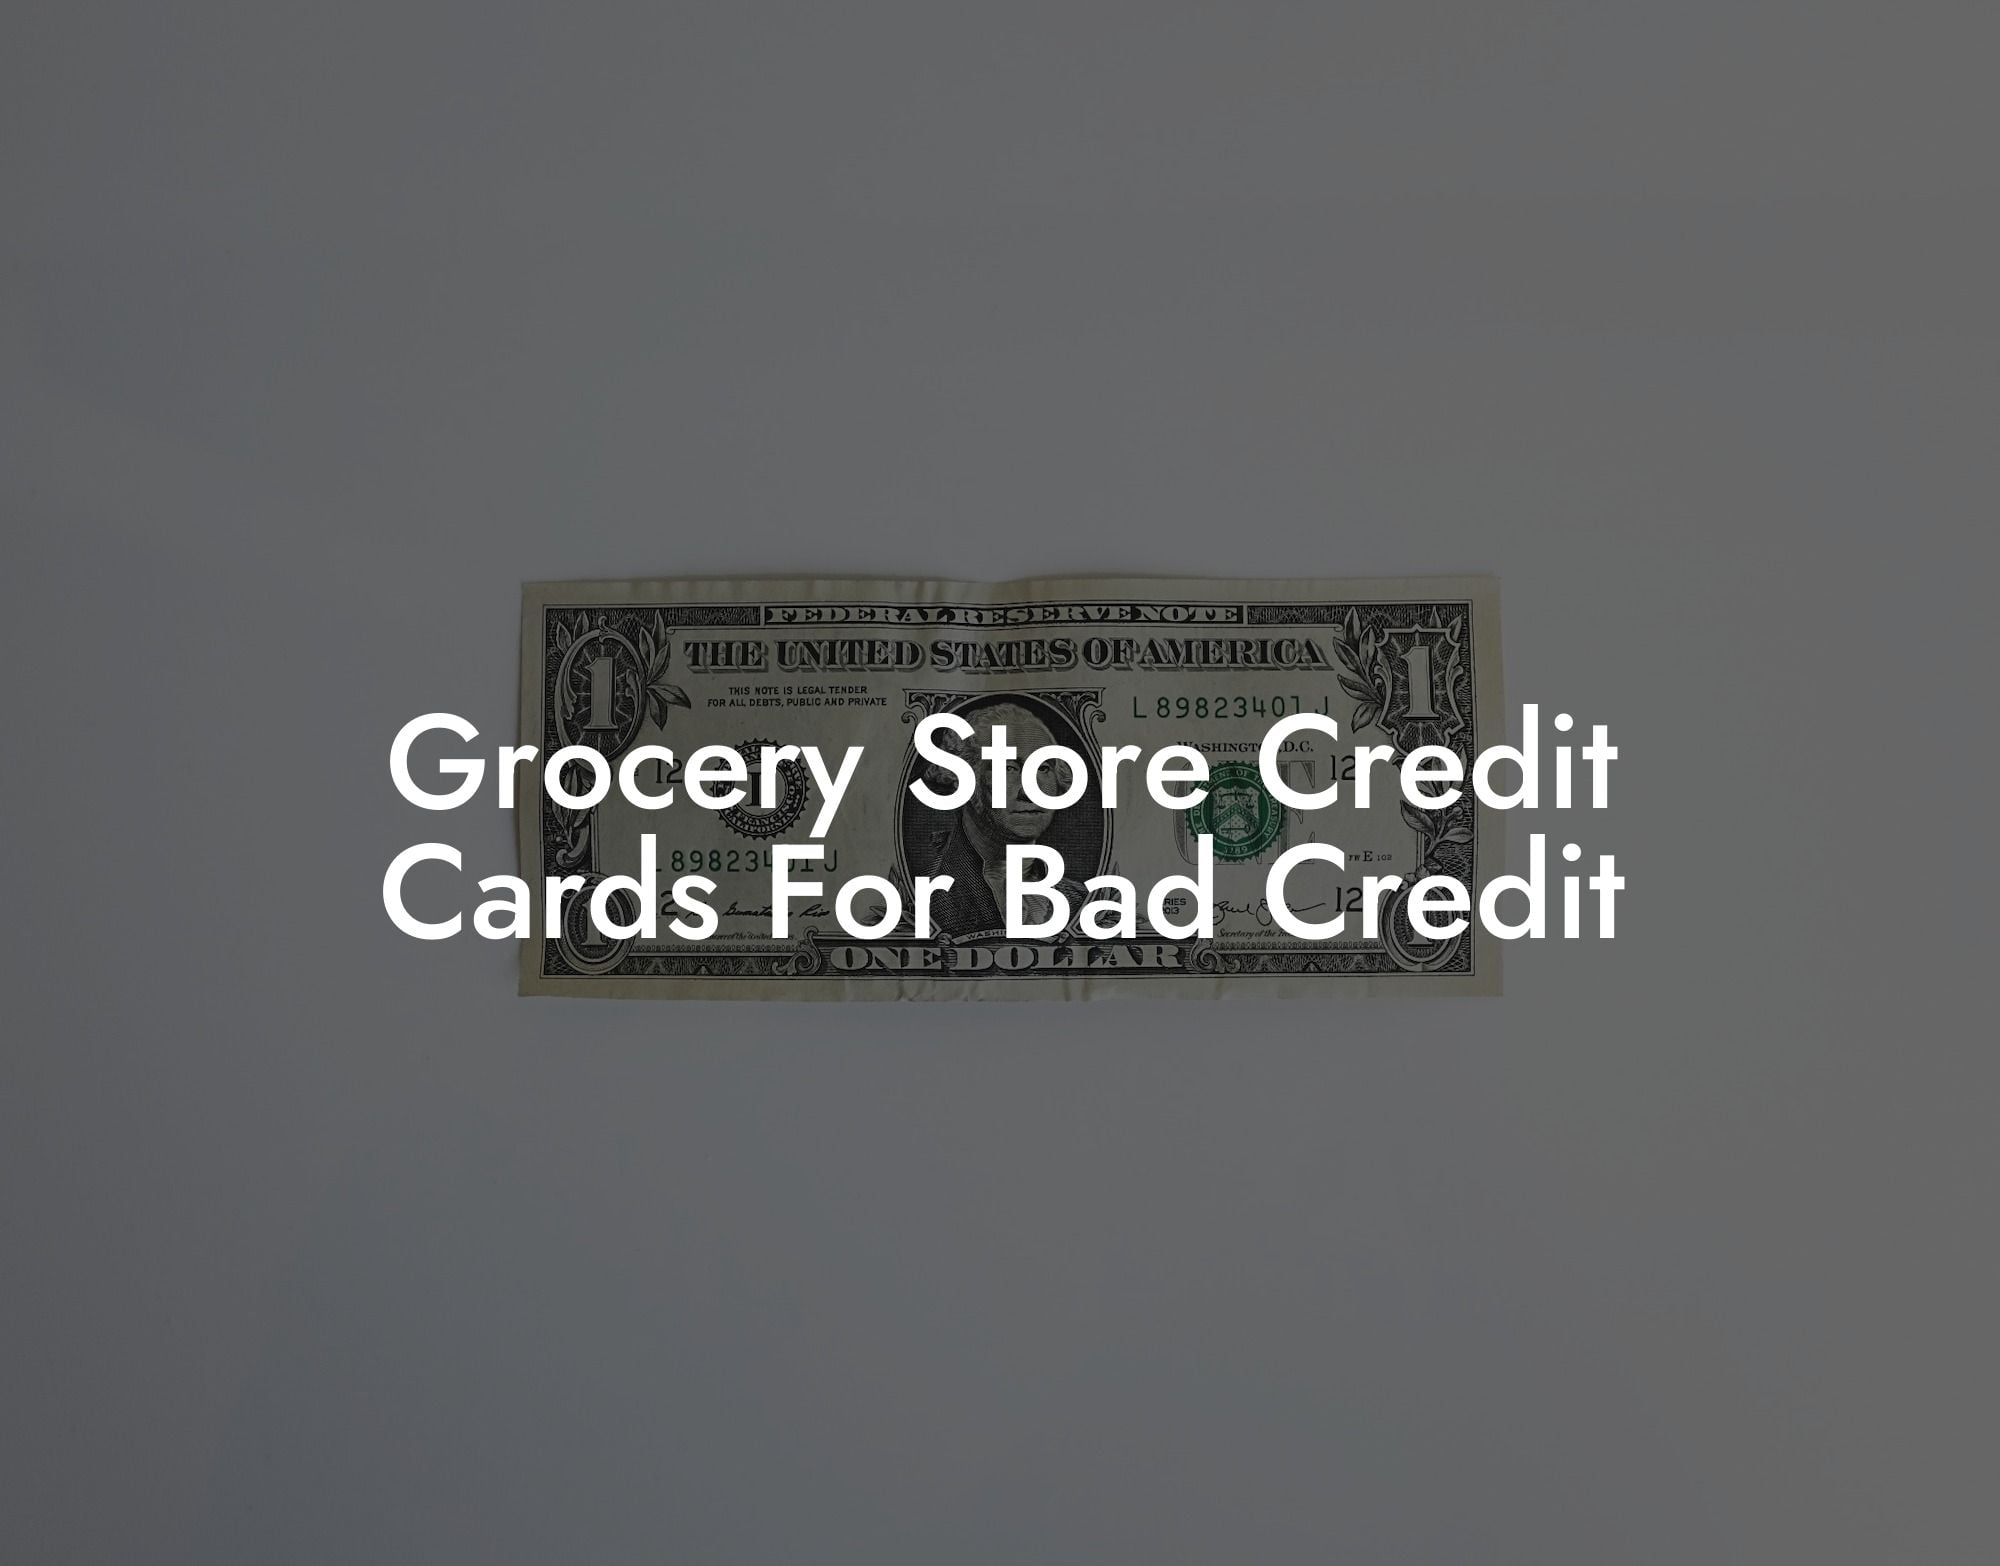 Grocery Store Credit Cards For Bad Credit